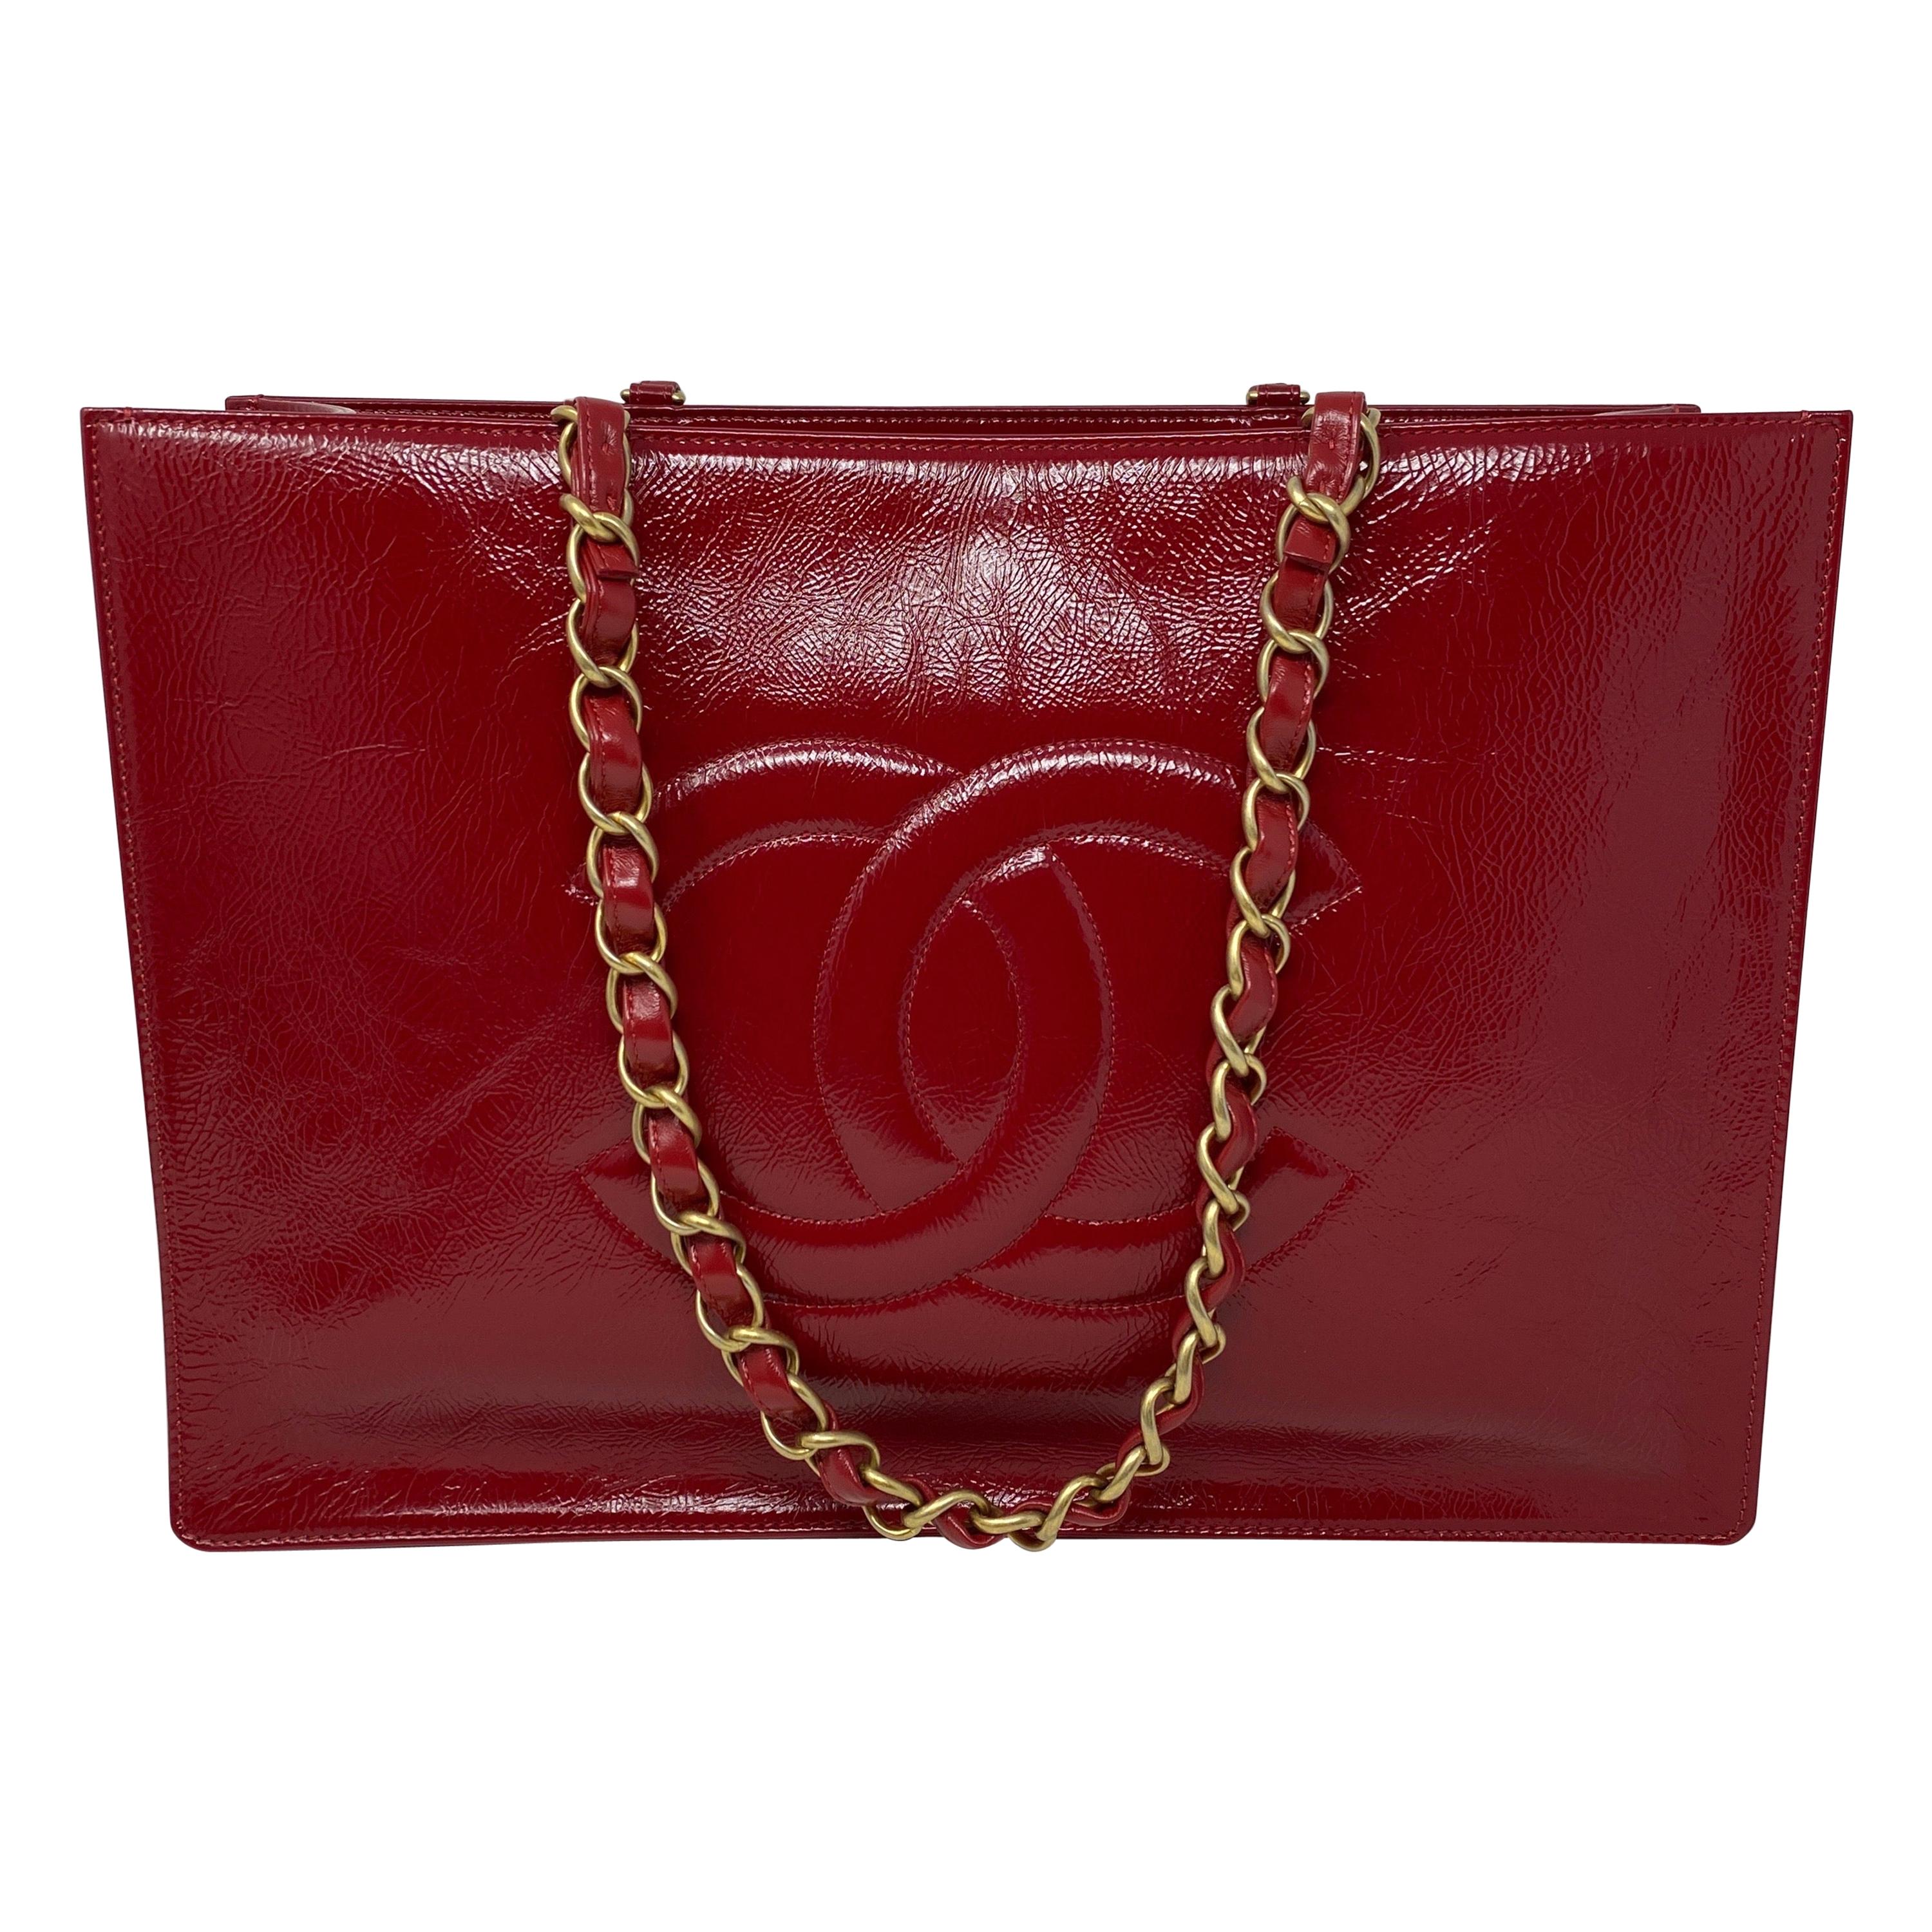 Chanel Red Tote 